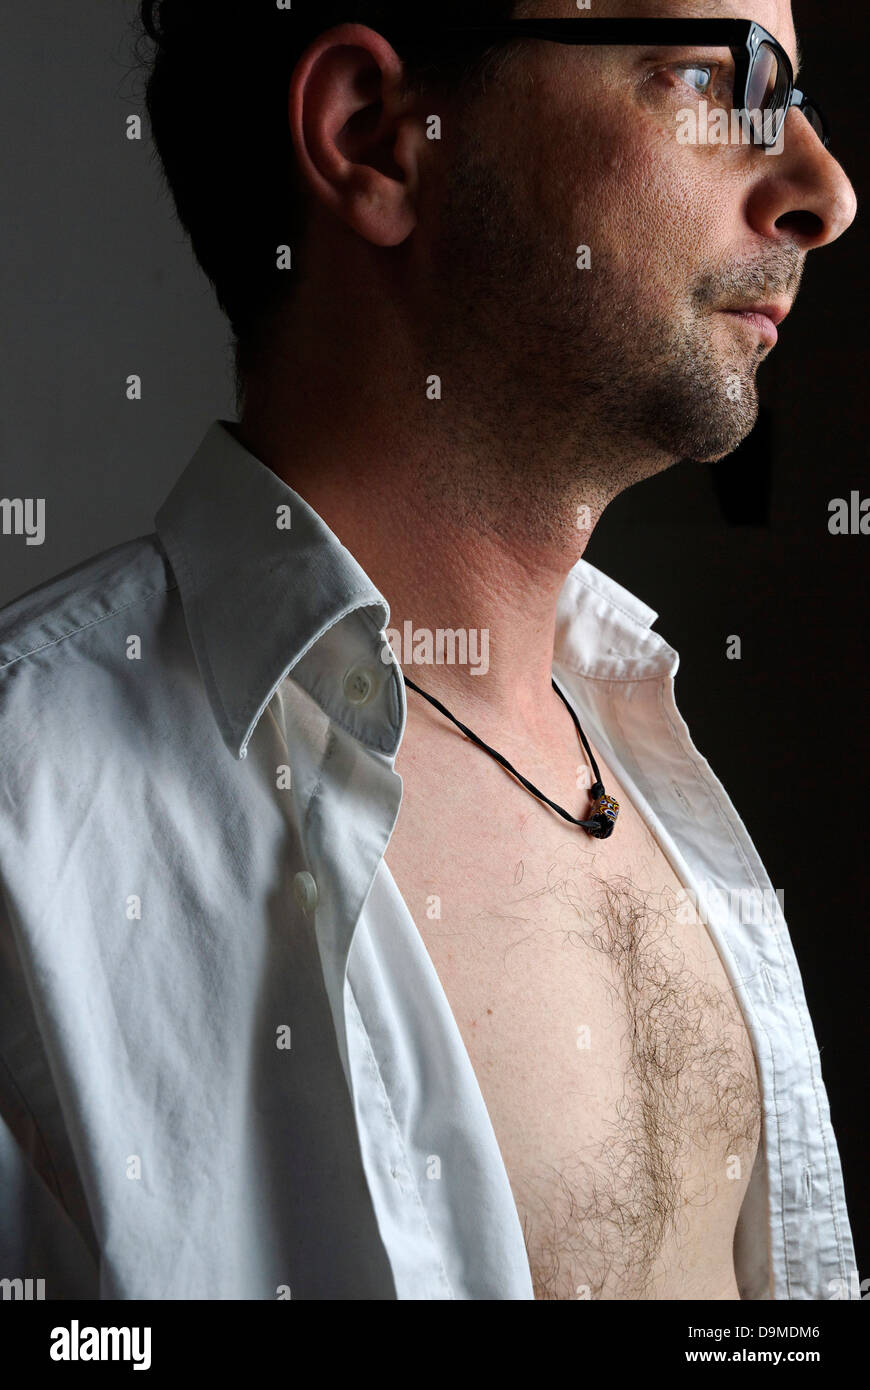 a middle aged man with an open white shirt Stock Photo